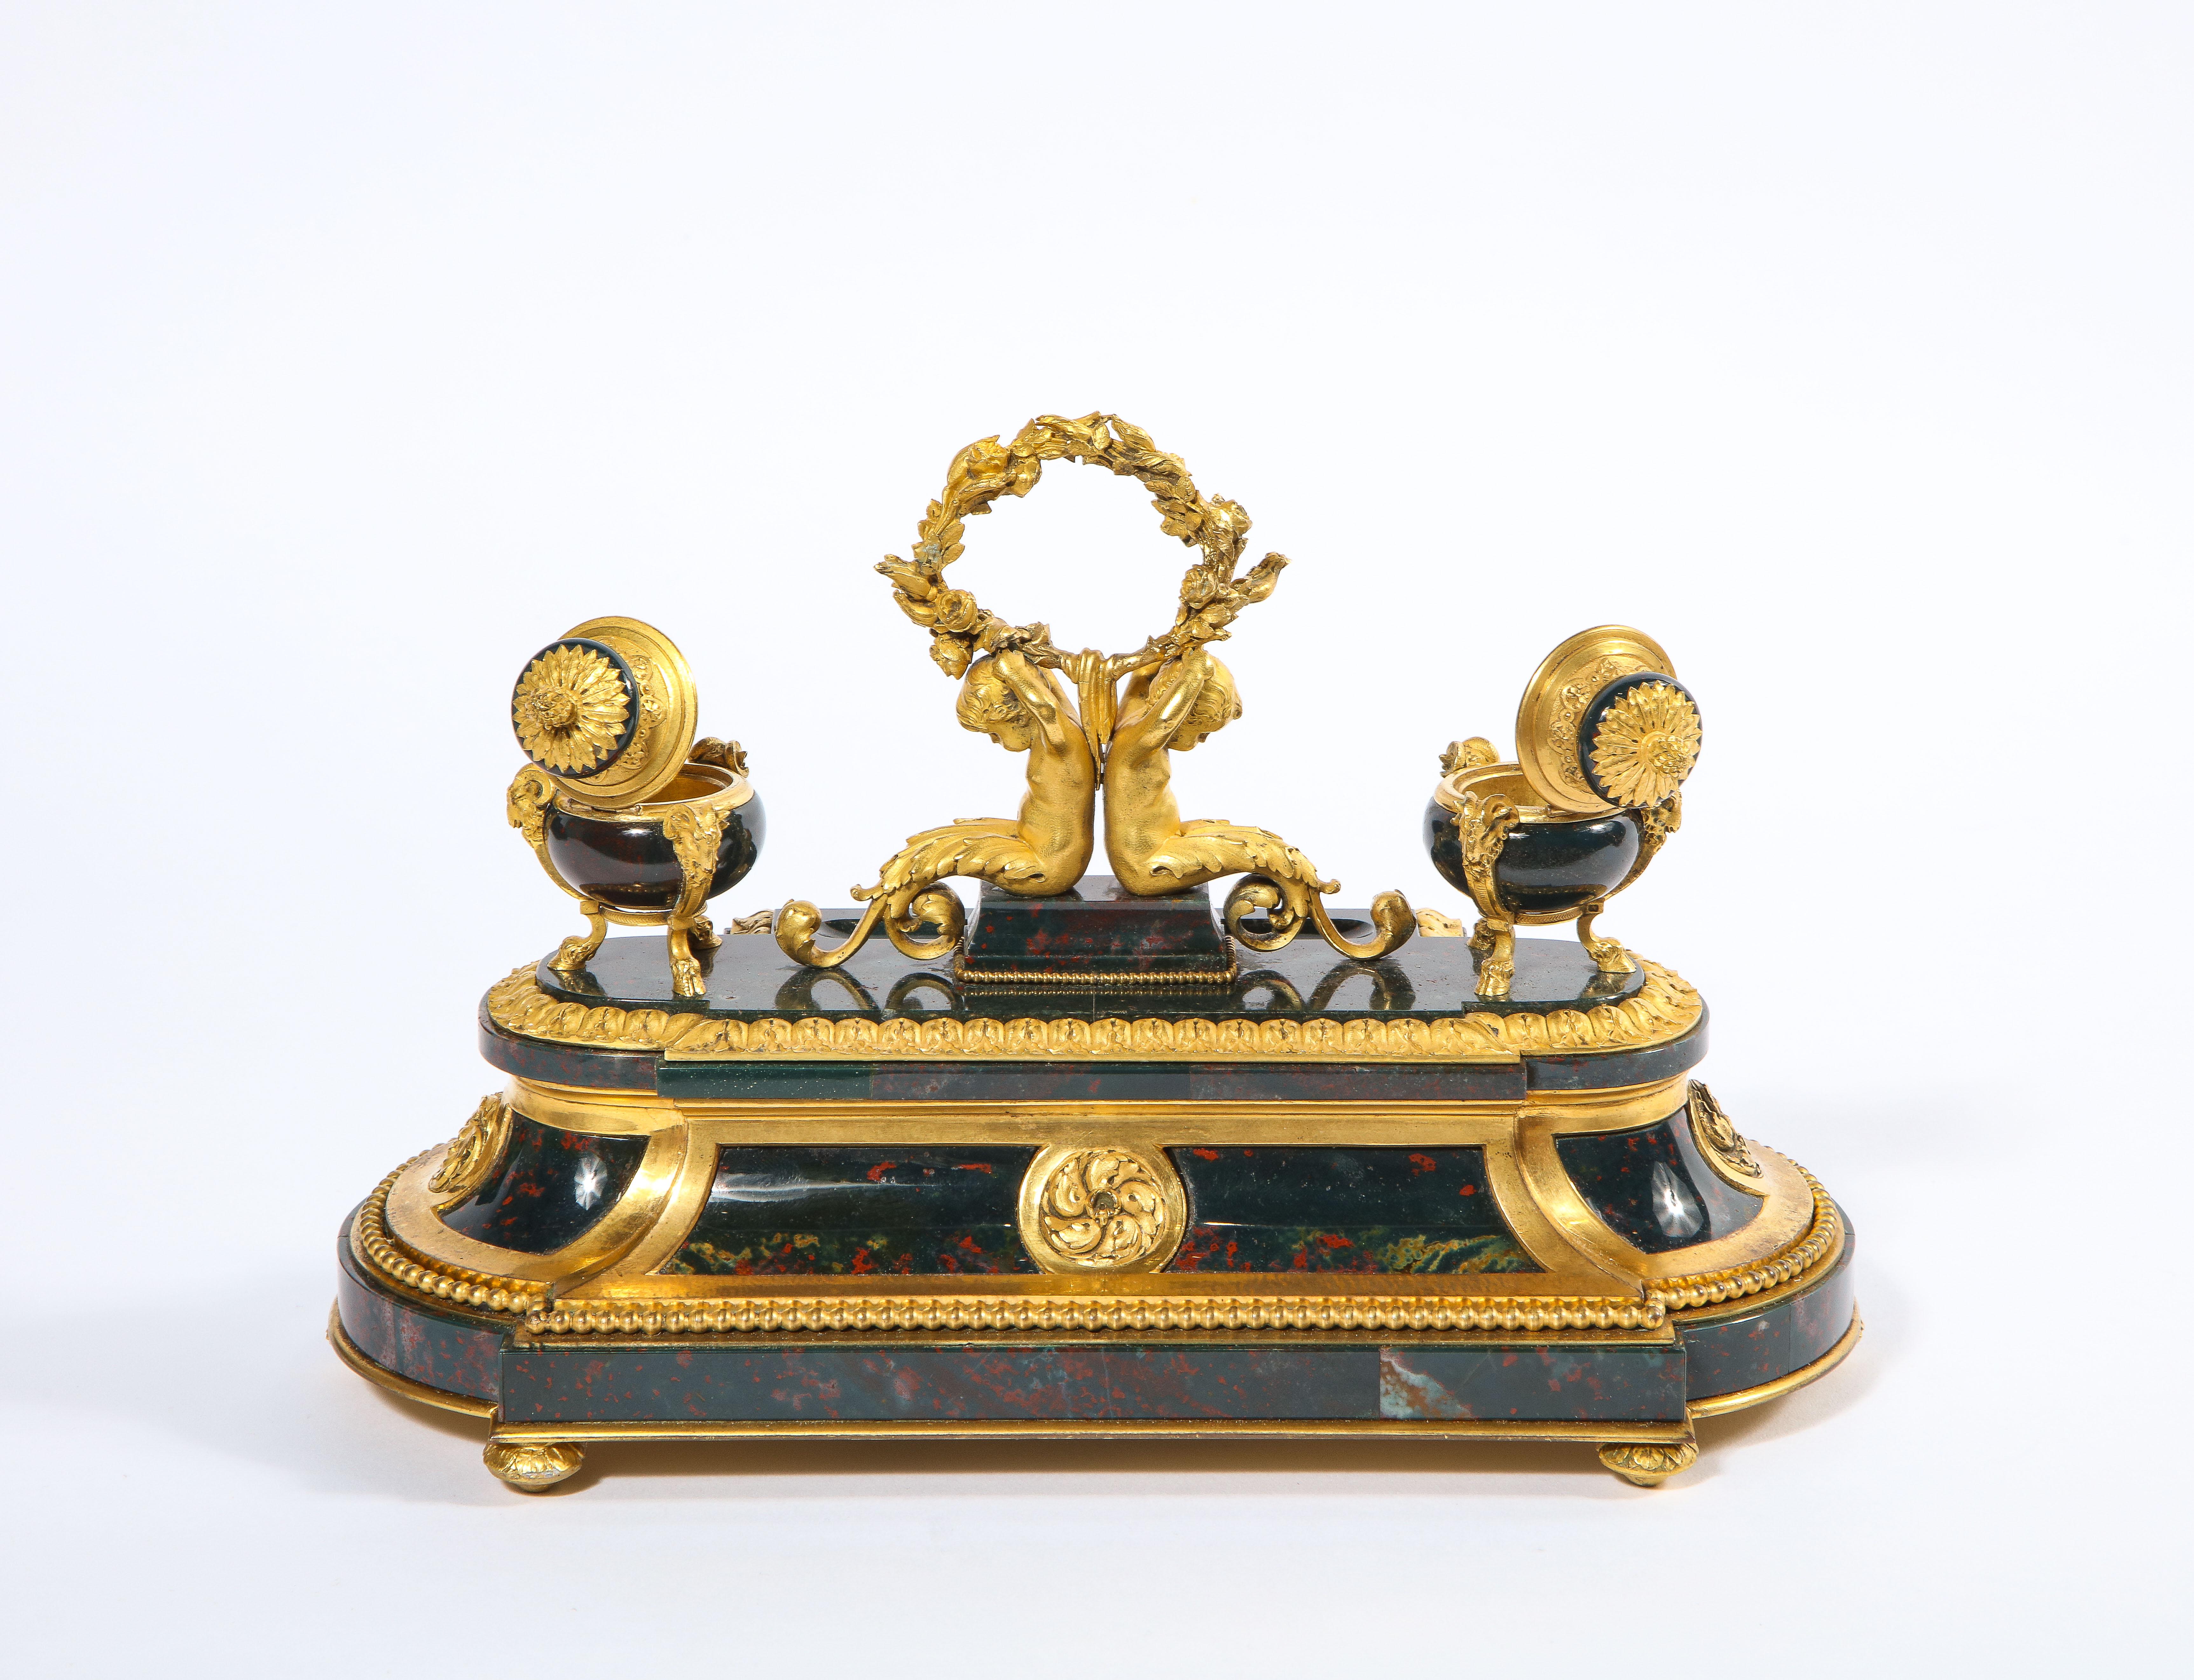 An Exquisite and Rare French Louis XVI Style Ormolu-Mounted Bloodstone Inkwell For Sale 3